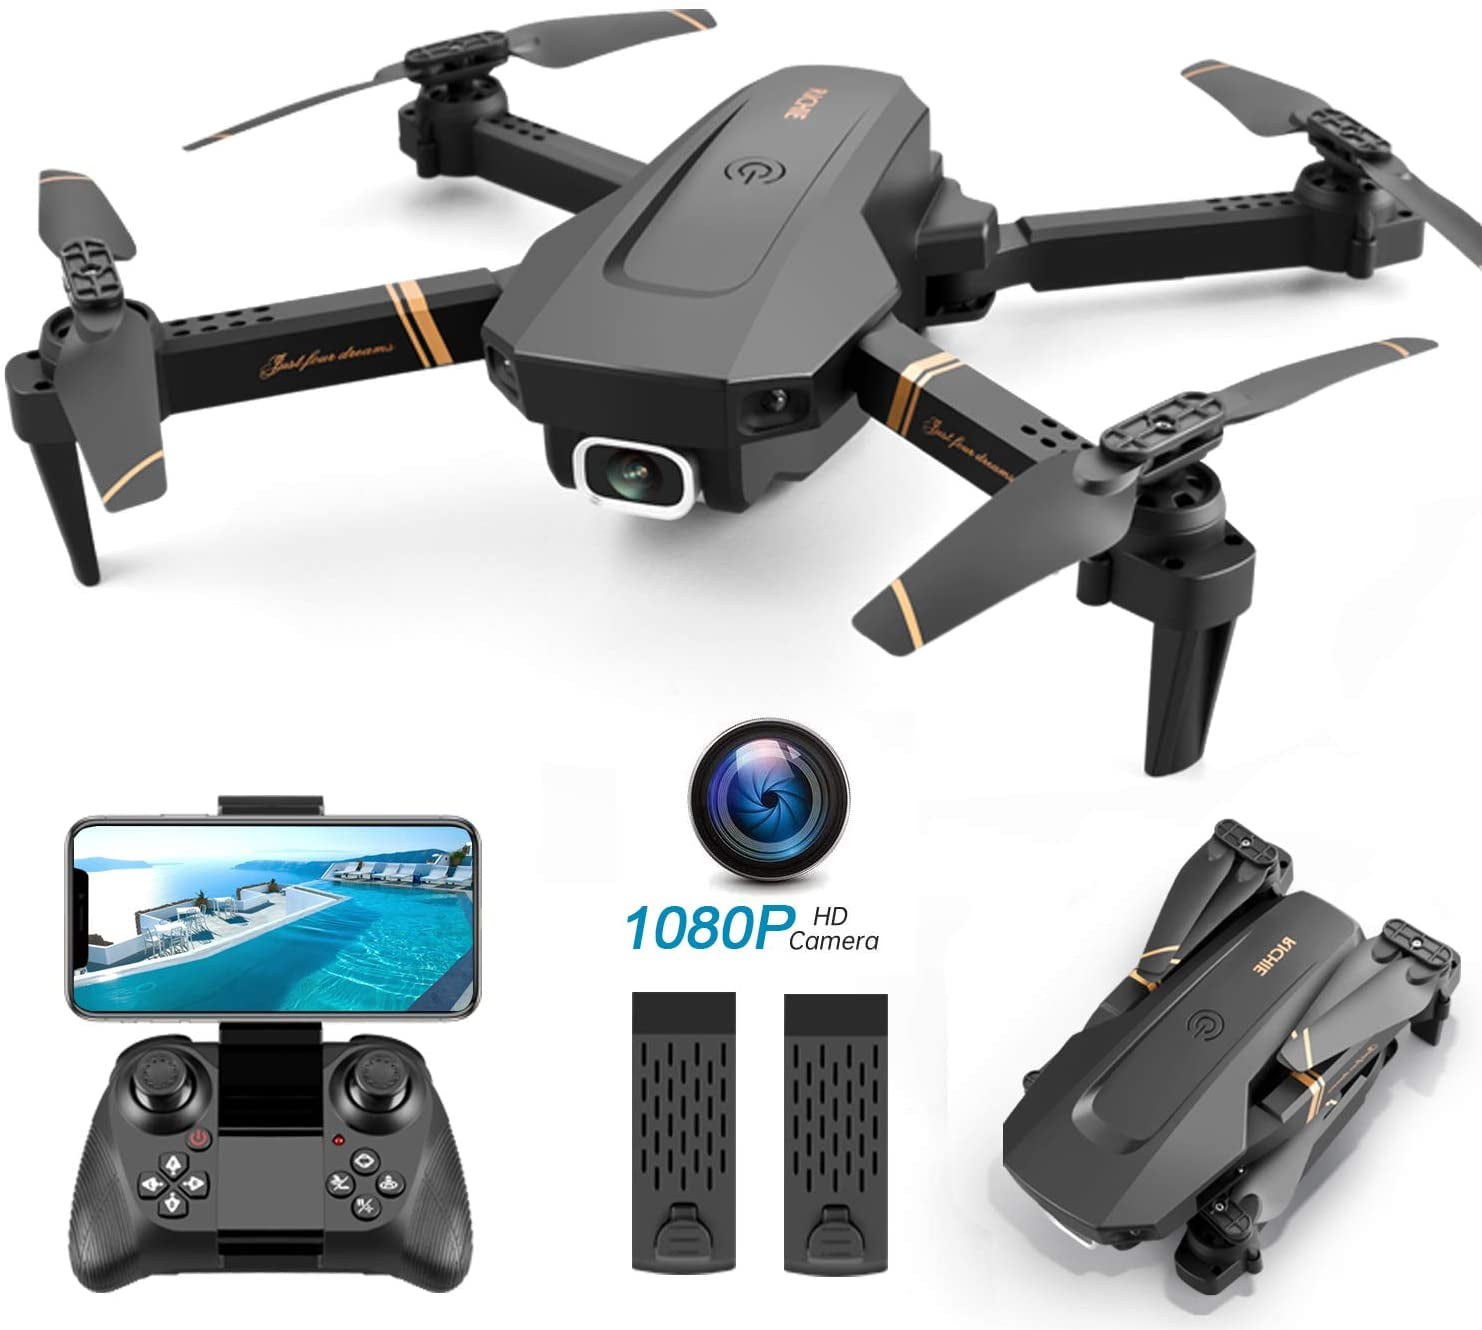 SPG026307 HD Camera Drone Quadcopter Virtual Reality VR Wi-Fi REAL-TIME VIDEO 